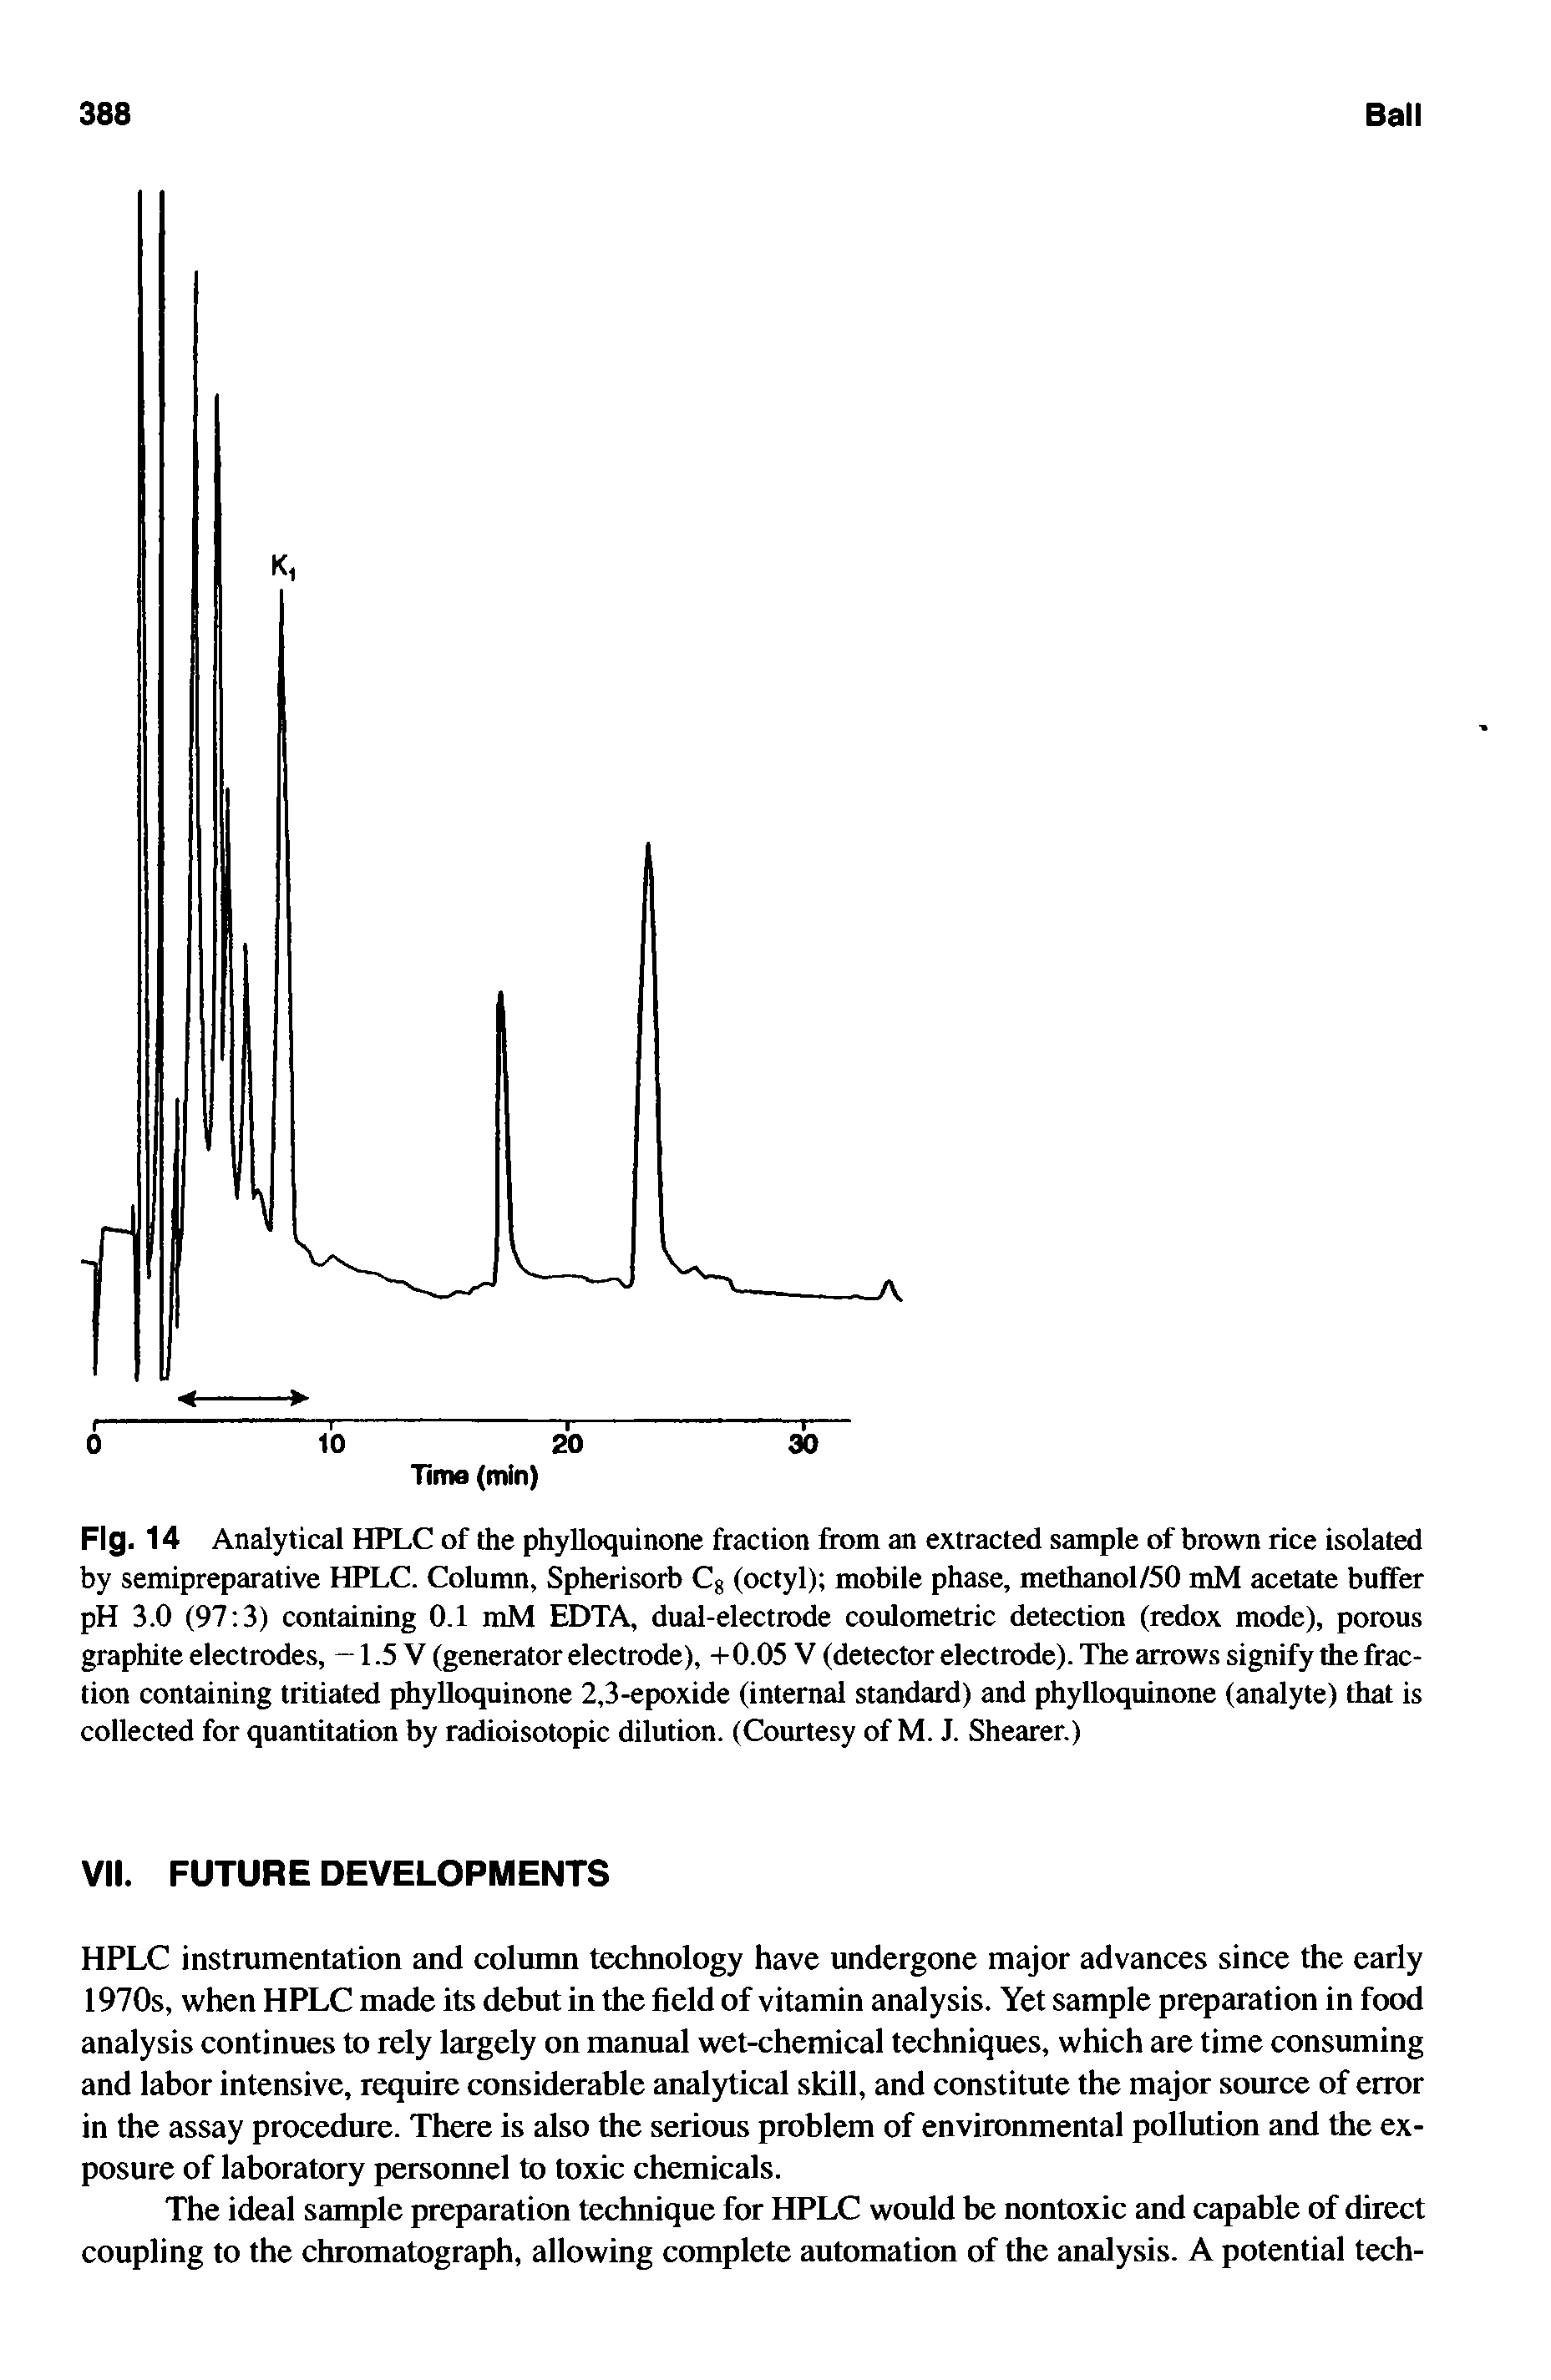 Fig. 14 Analytical HPLC of the phylloquinone fraction from an extracted sample of brown rice isolated by semipreparative HPLC. Column, Spherisorb C8 (octyl) mobile phase, methanol/50 mM acetate buffer pH 3.0 (97 3) containing 0.1 mM EDTA, dual-electrode coulometric detection (redox mode), porous graphite electrodes, — 1.5 V (generator electrode), +0.05 V (detector electrode). The arrows signify the fraction containing tritiated phylloquinone 2,3-epoxide (internal standard) and phylloquinone (analyte) that is collected for quantitation by radioisotopic dilution. (Courtesy of M. J. Shearer.)...